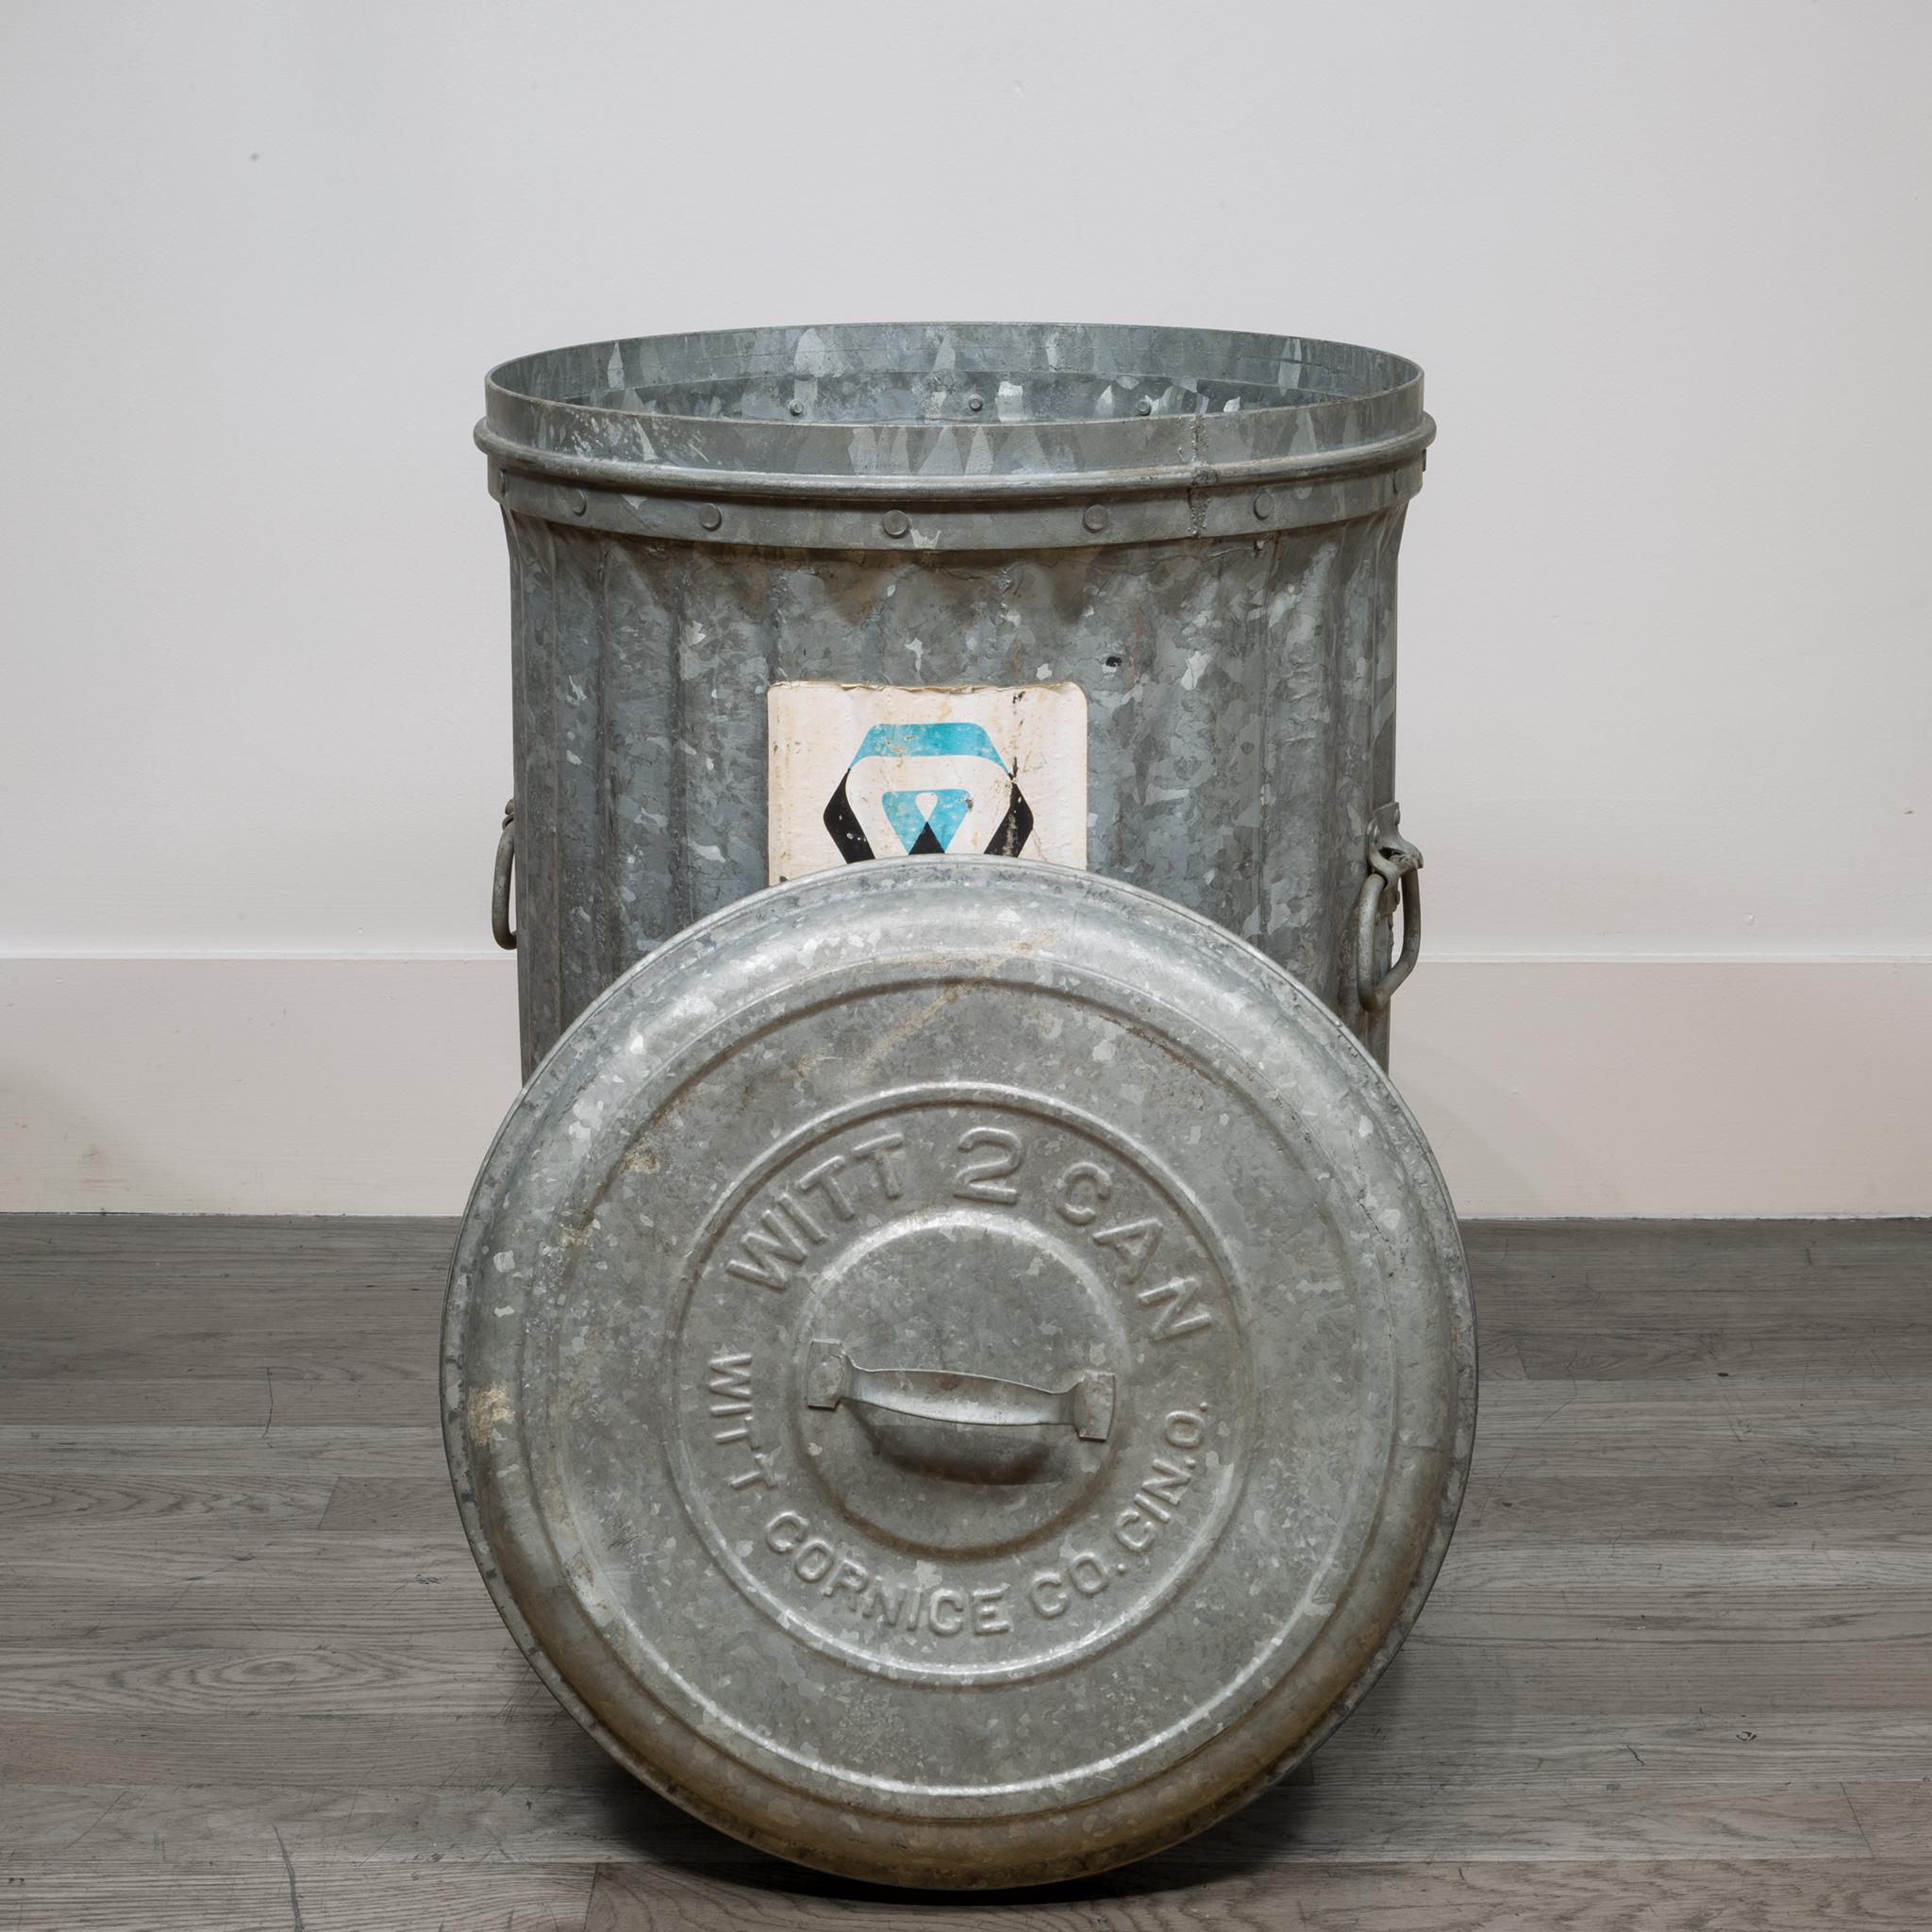 About

All original and completely intact early 20th century antique American vintage industrial outdoor trash can with original handled lid. The robust waste can is comprised of heavy gauge galvanized steel with riveted joint reinforcement. It